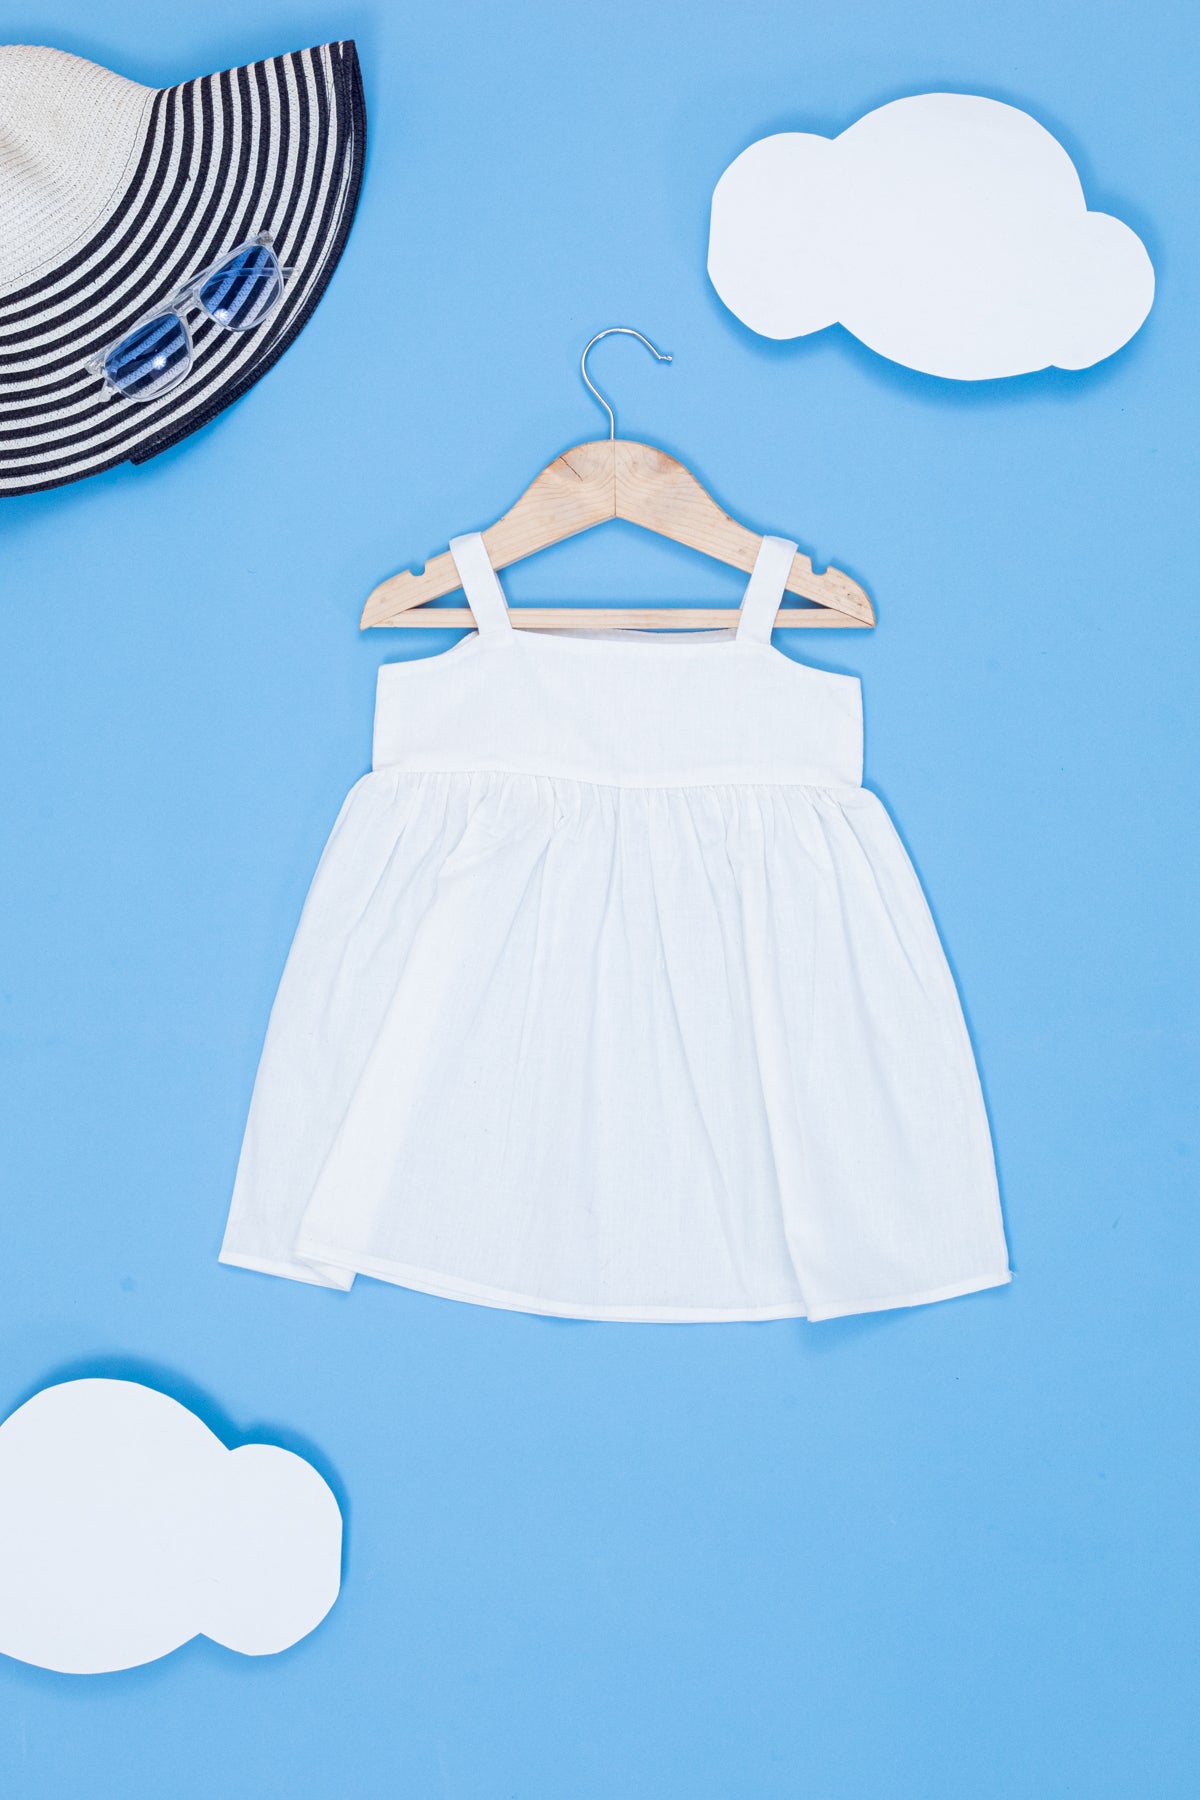 Candy White Cotton Bow Dress for Kids